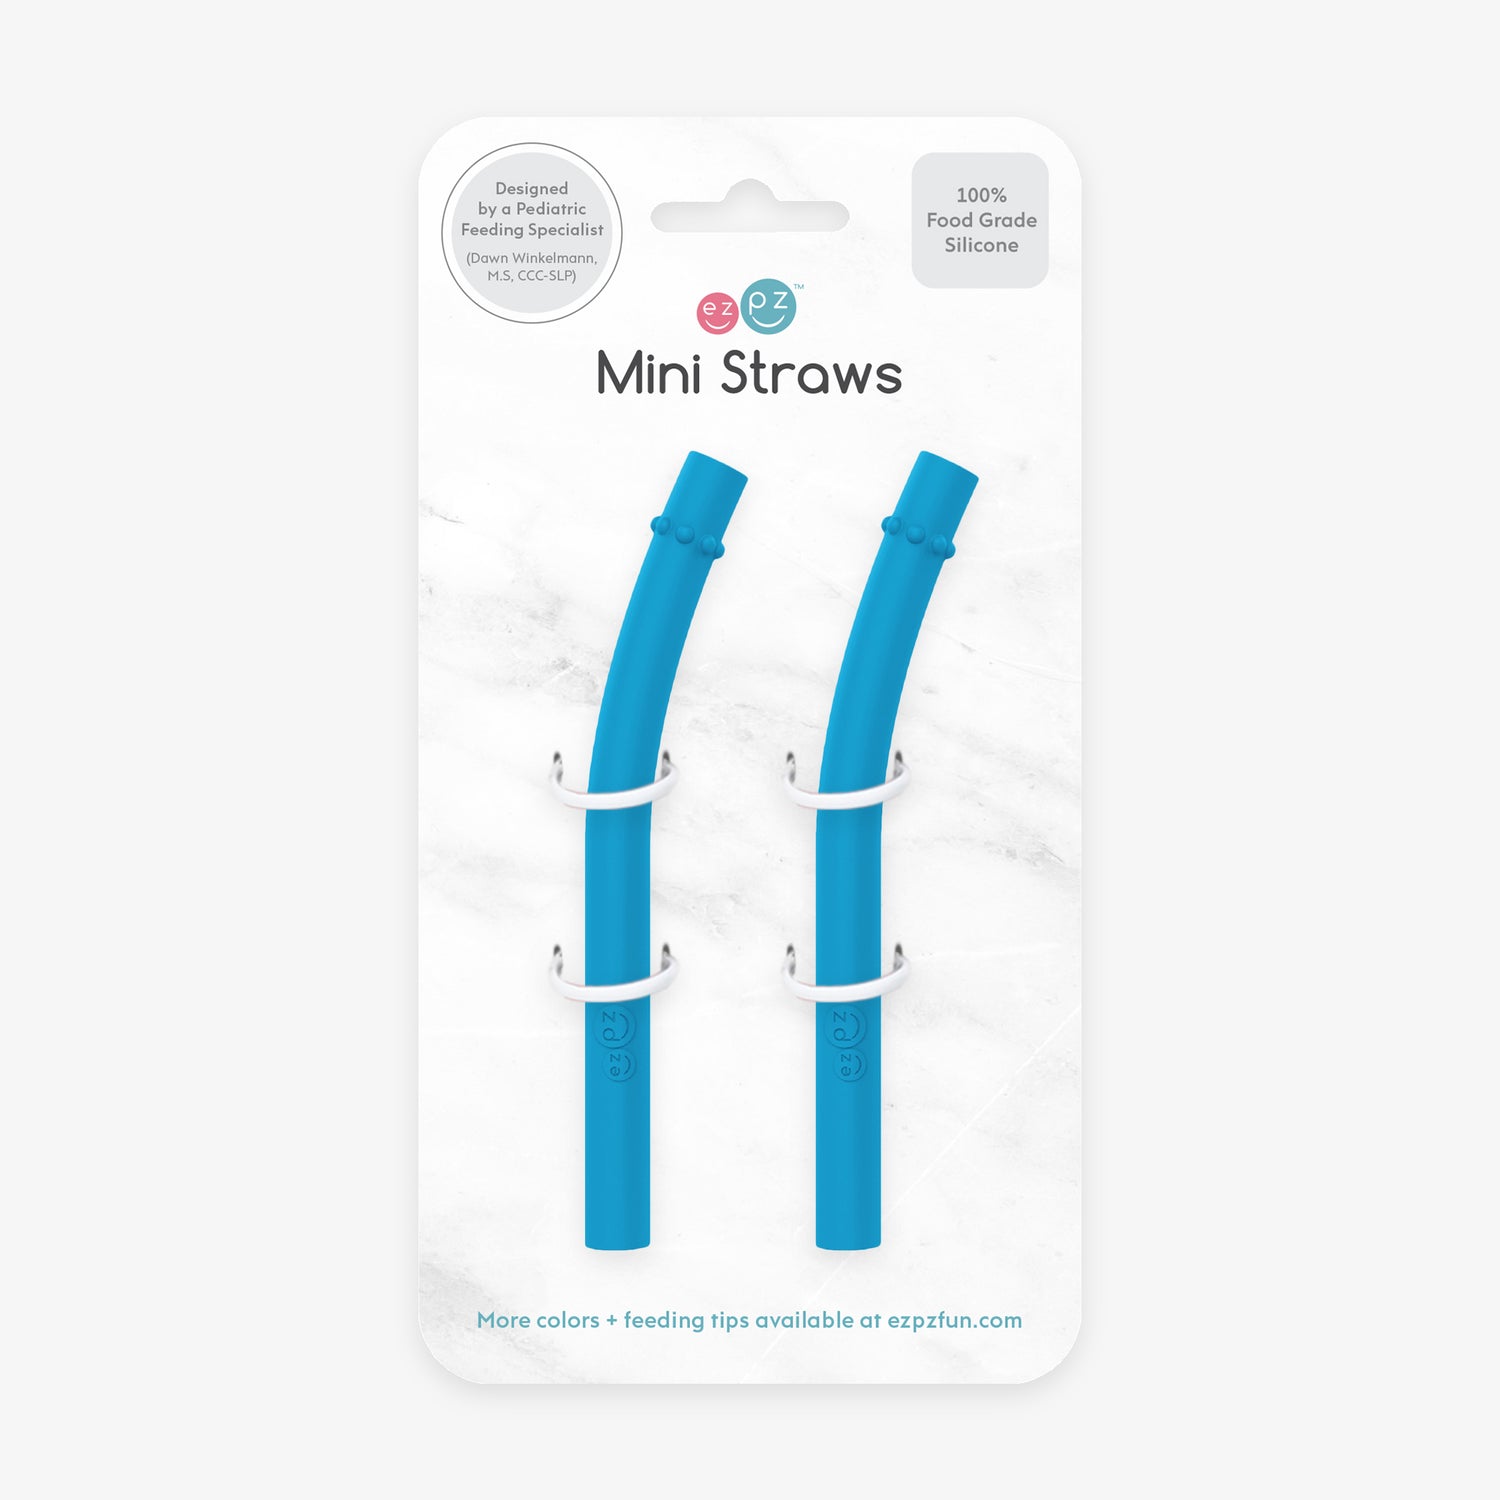 Mini Straws in Blue / Silicone Straw Replacement Pack for the ezpz Mini Cup & Straw System